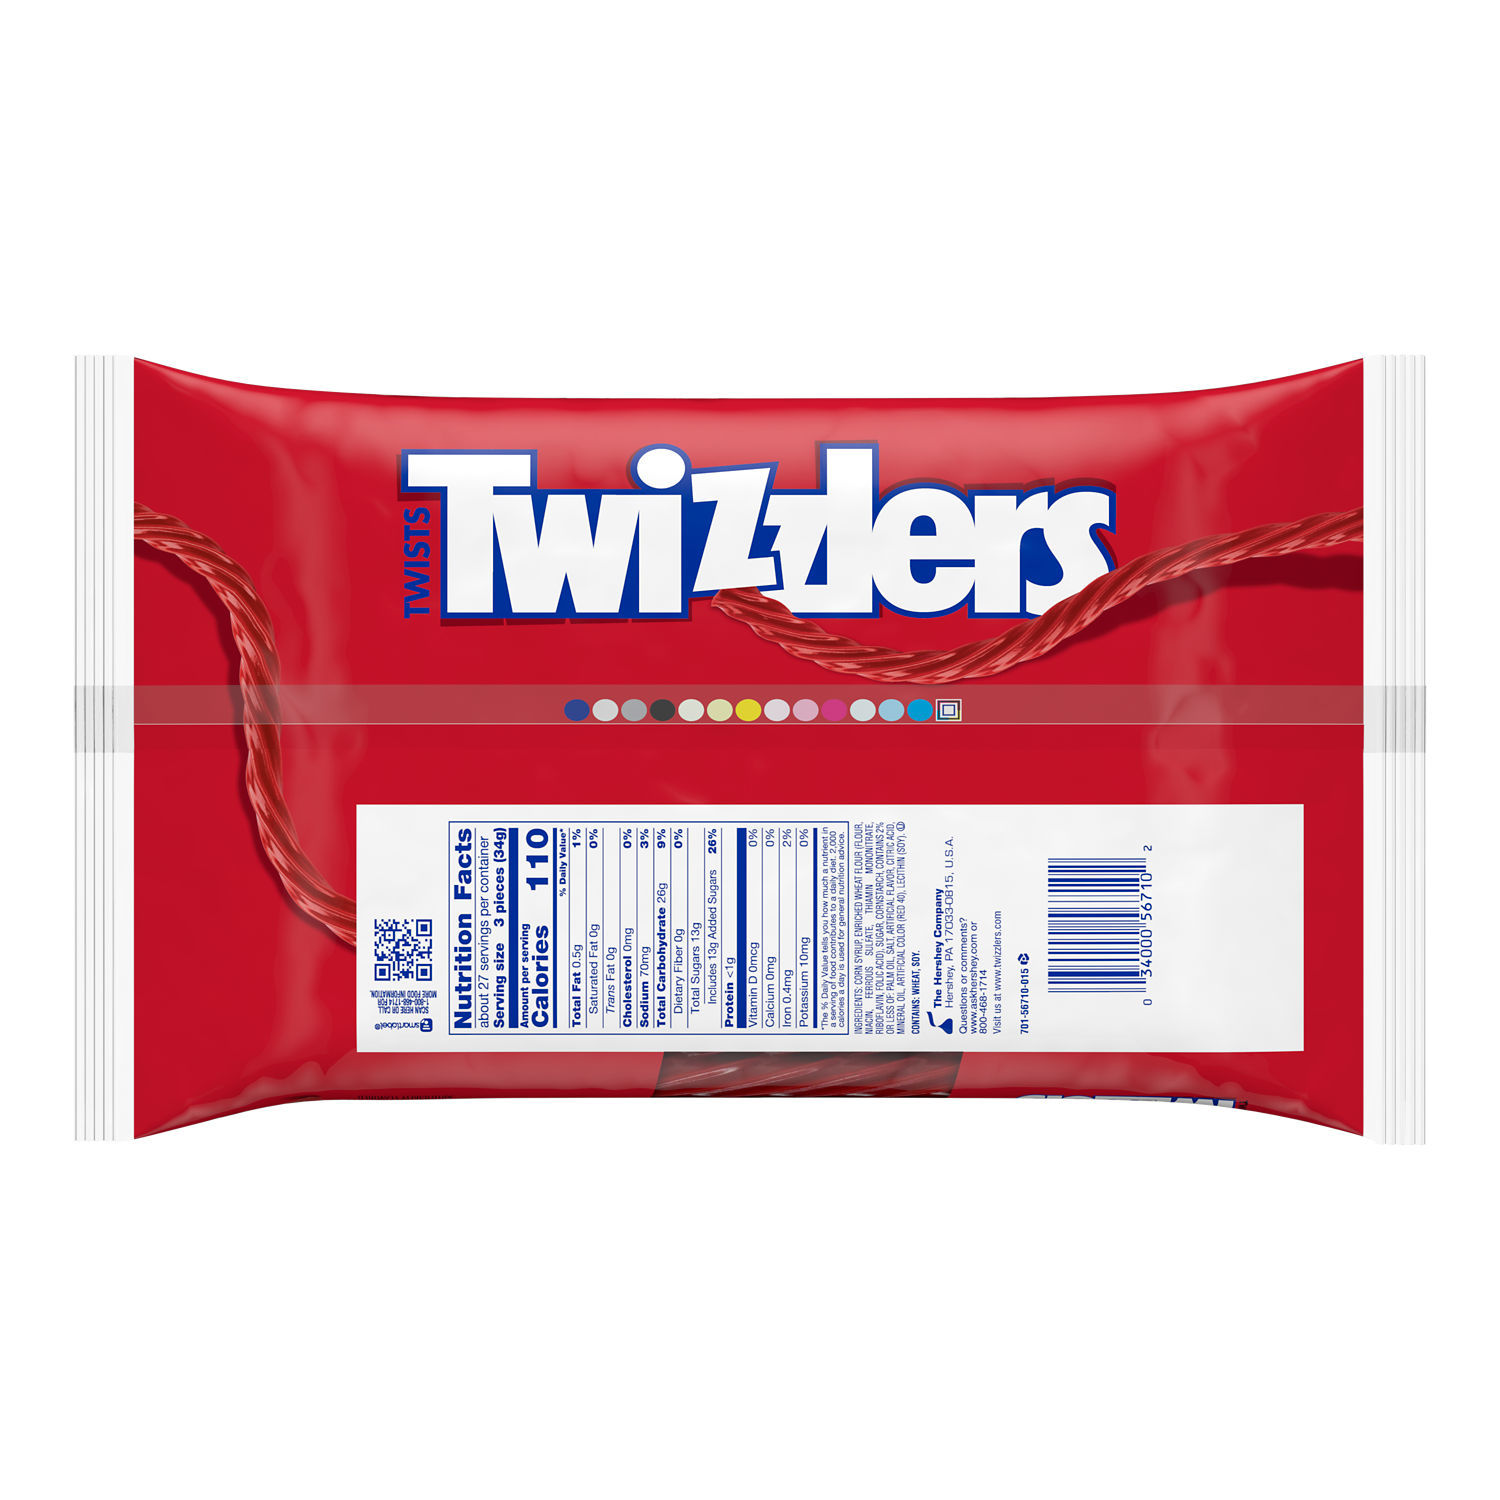 Twizzlers Twists Strawberry Flavored Licorice Style Low Fat Candy, Big Bag 32 oz - image 3 of 9